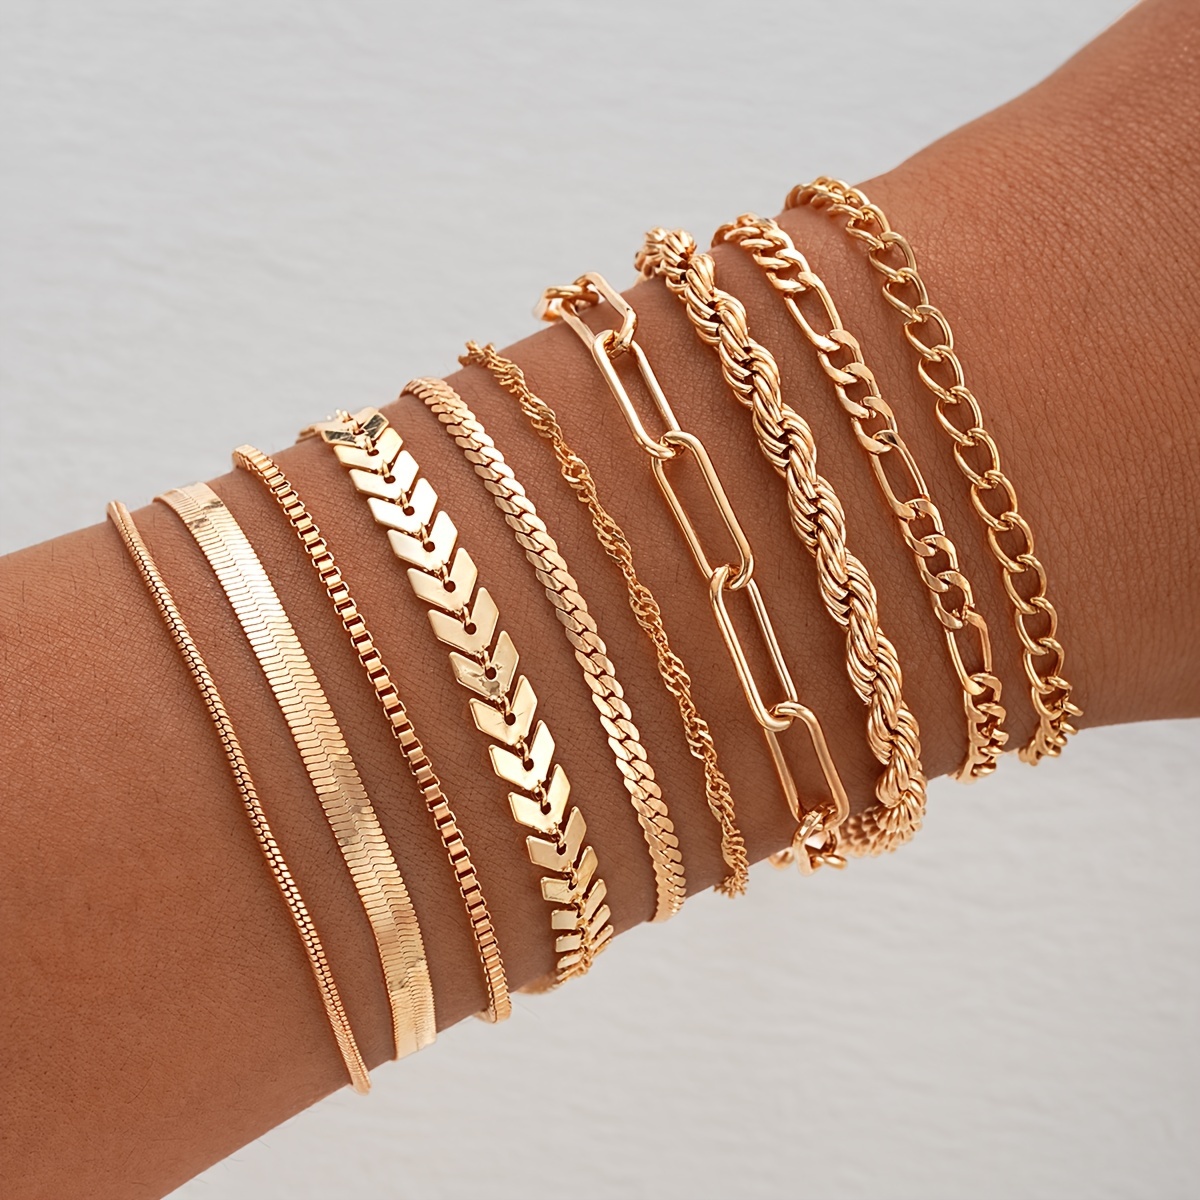 

10 Pcs Golden Bracelet Stack For Women, Elegant & Sexy Layered Bangle Collection, Fashion Jewelry For Daily Wear And Parties